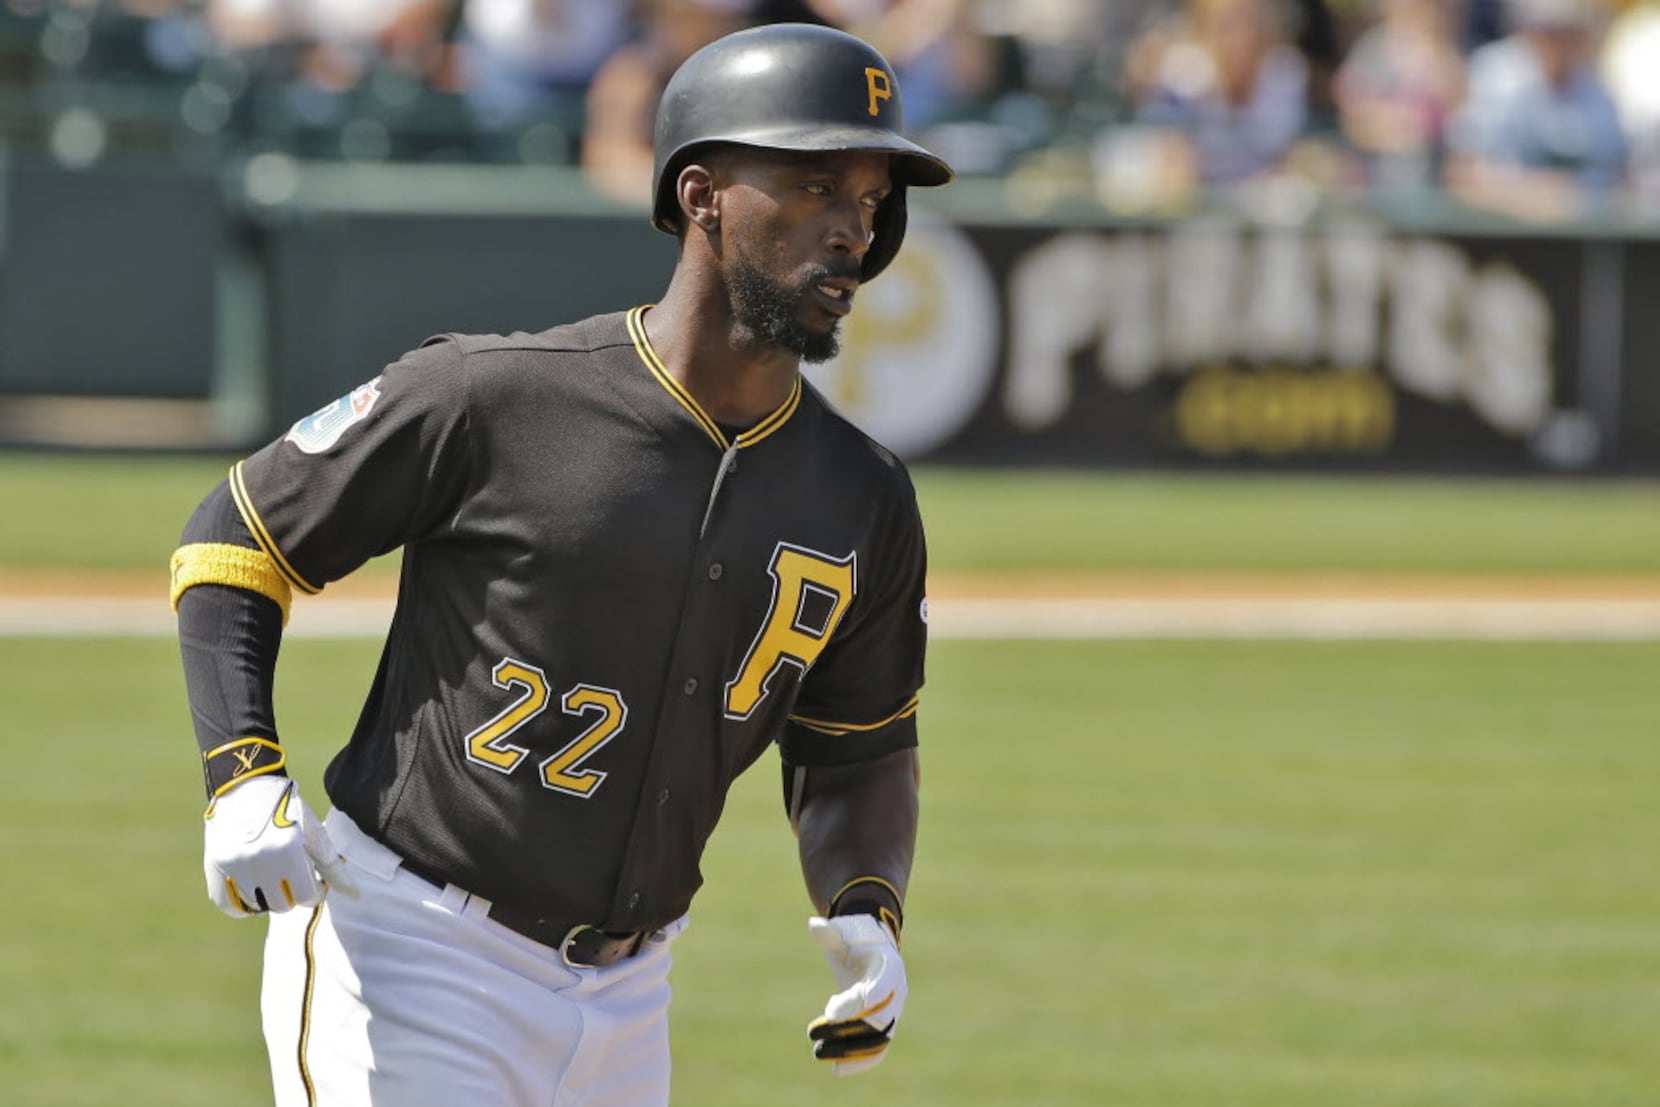 Three Thoughts: Face time for McCutchen